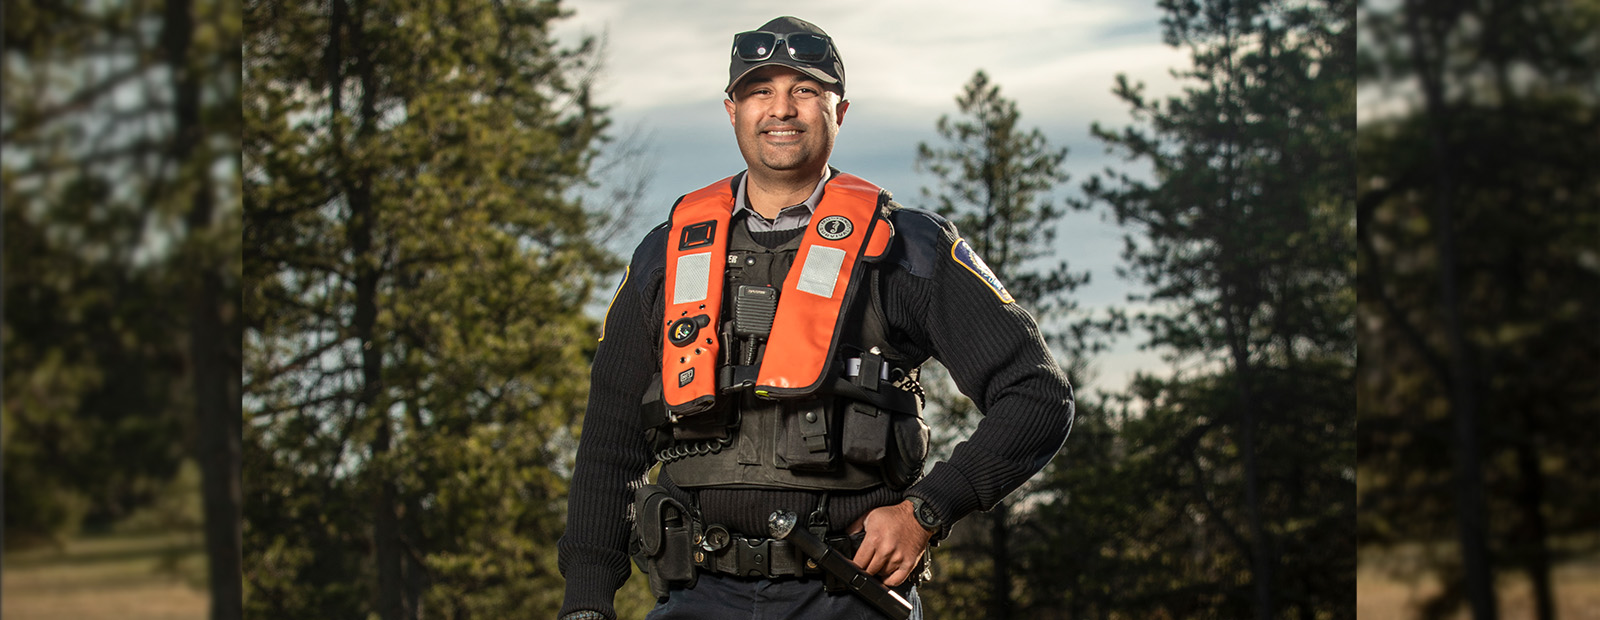 Zain Haji stands in front of a wooded area in his full park ranger uniform